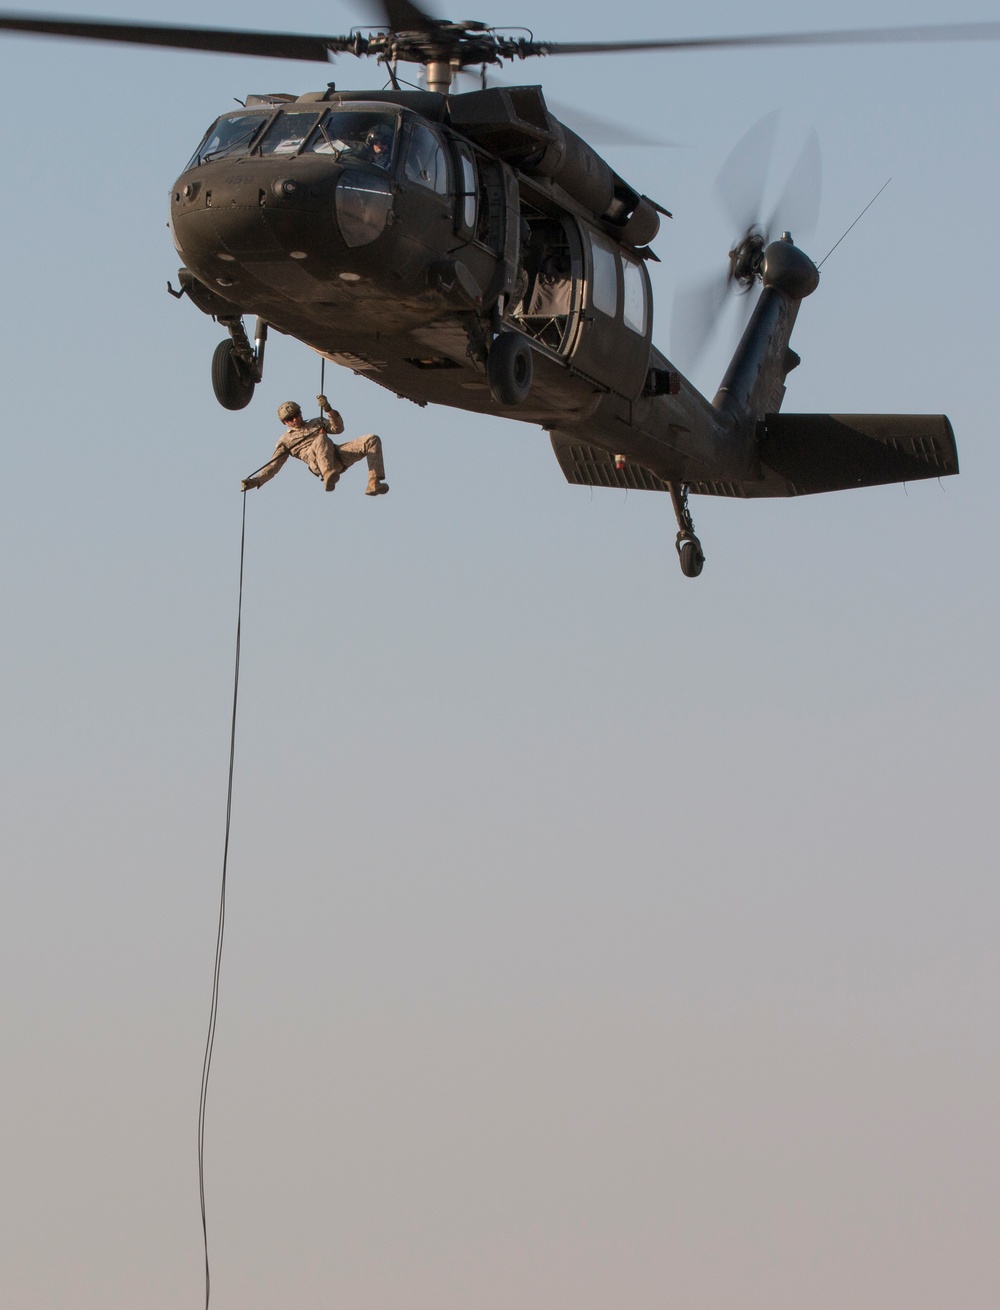 Joint rappel exercise